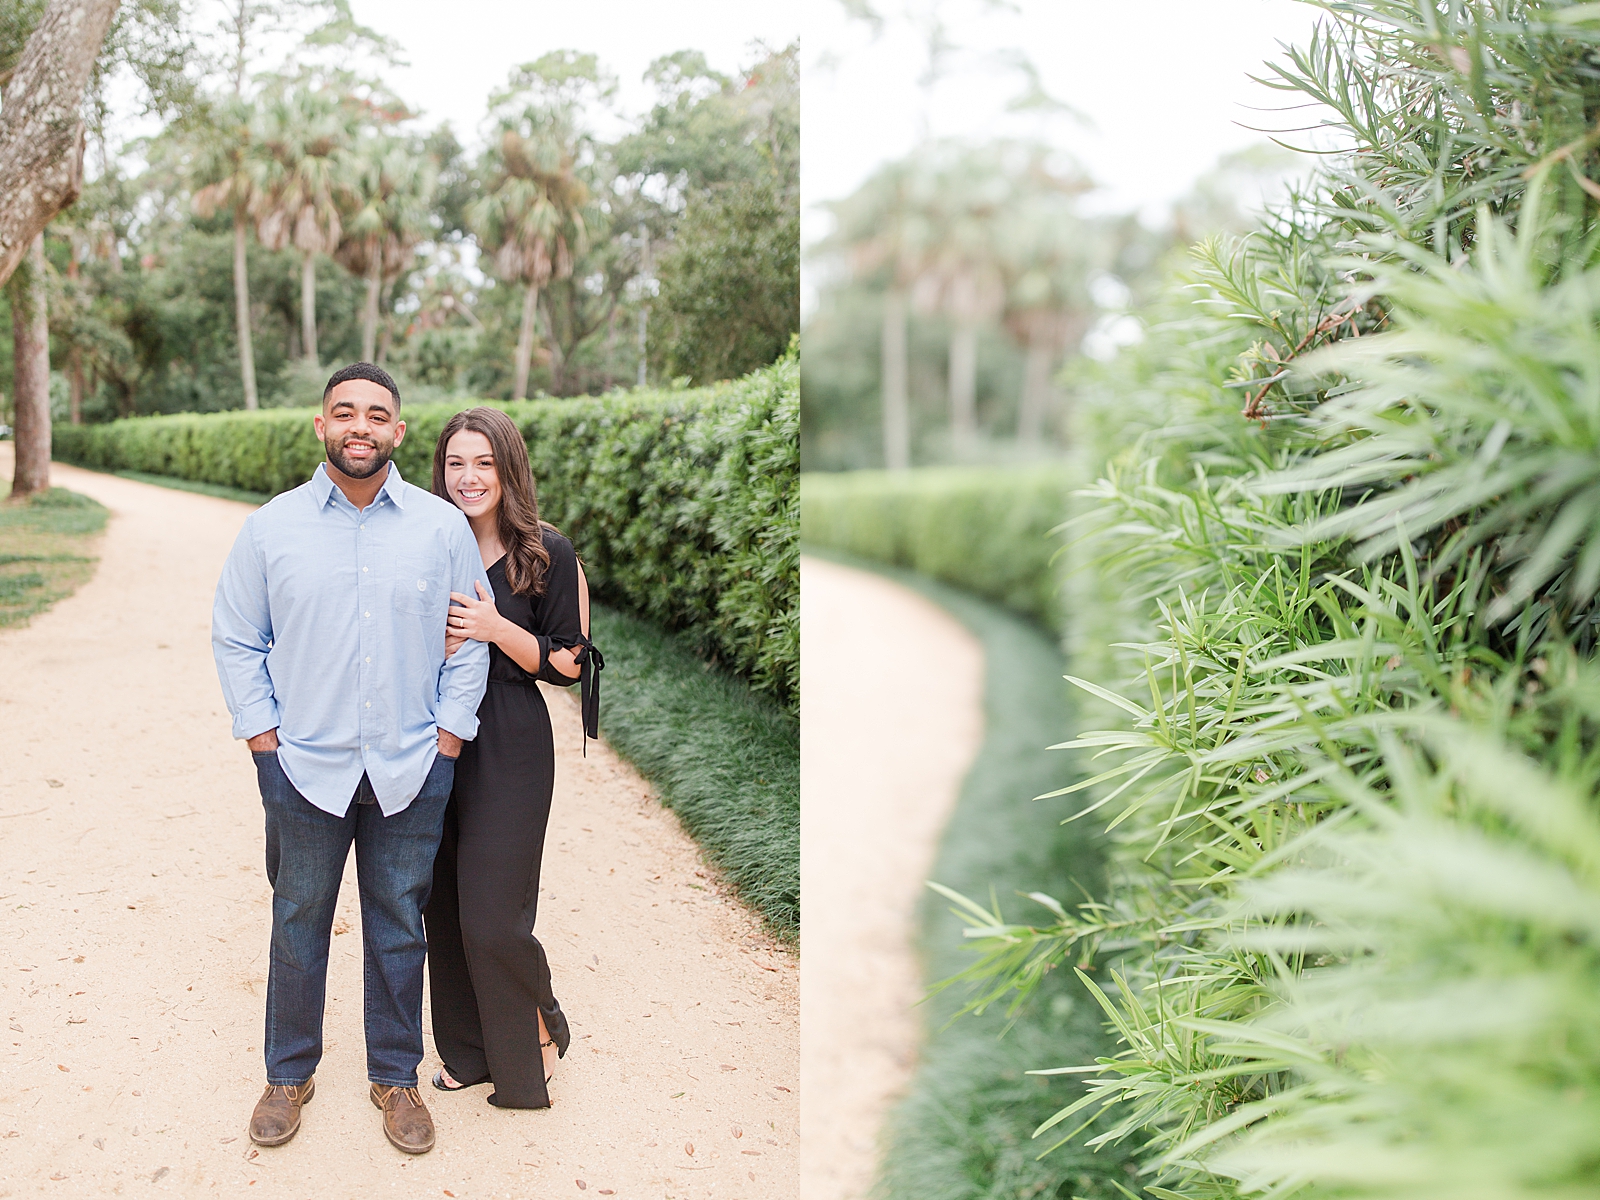 St. Augustine Engagement Nick and Chloe smiling at camera and detail of greenery Photos